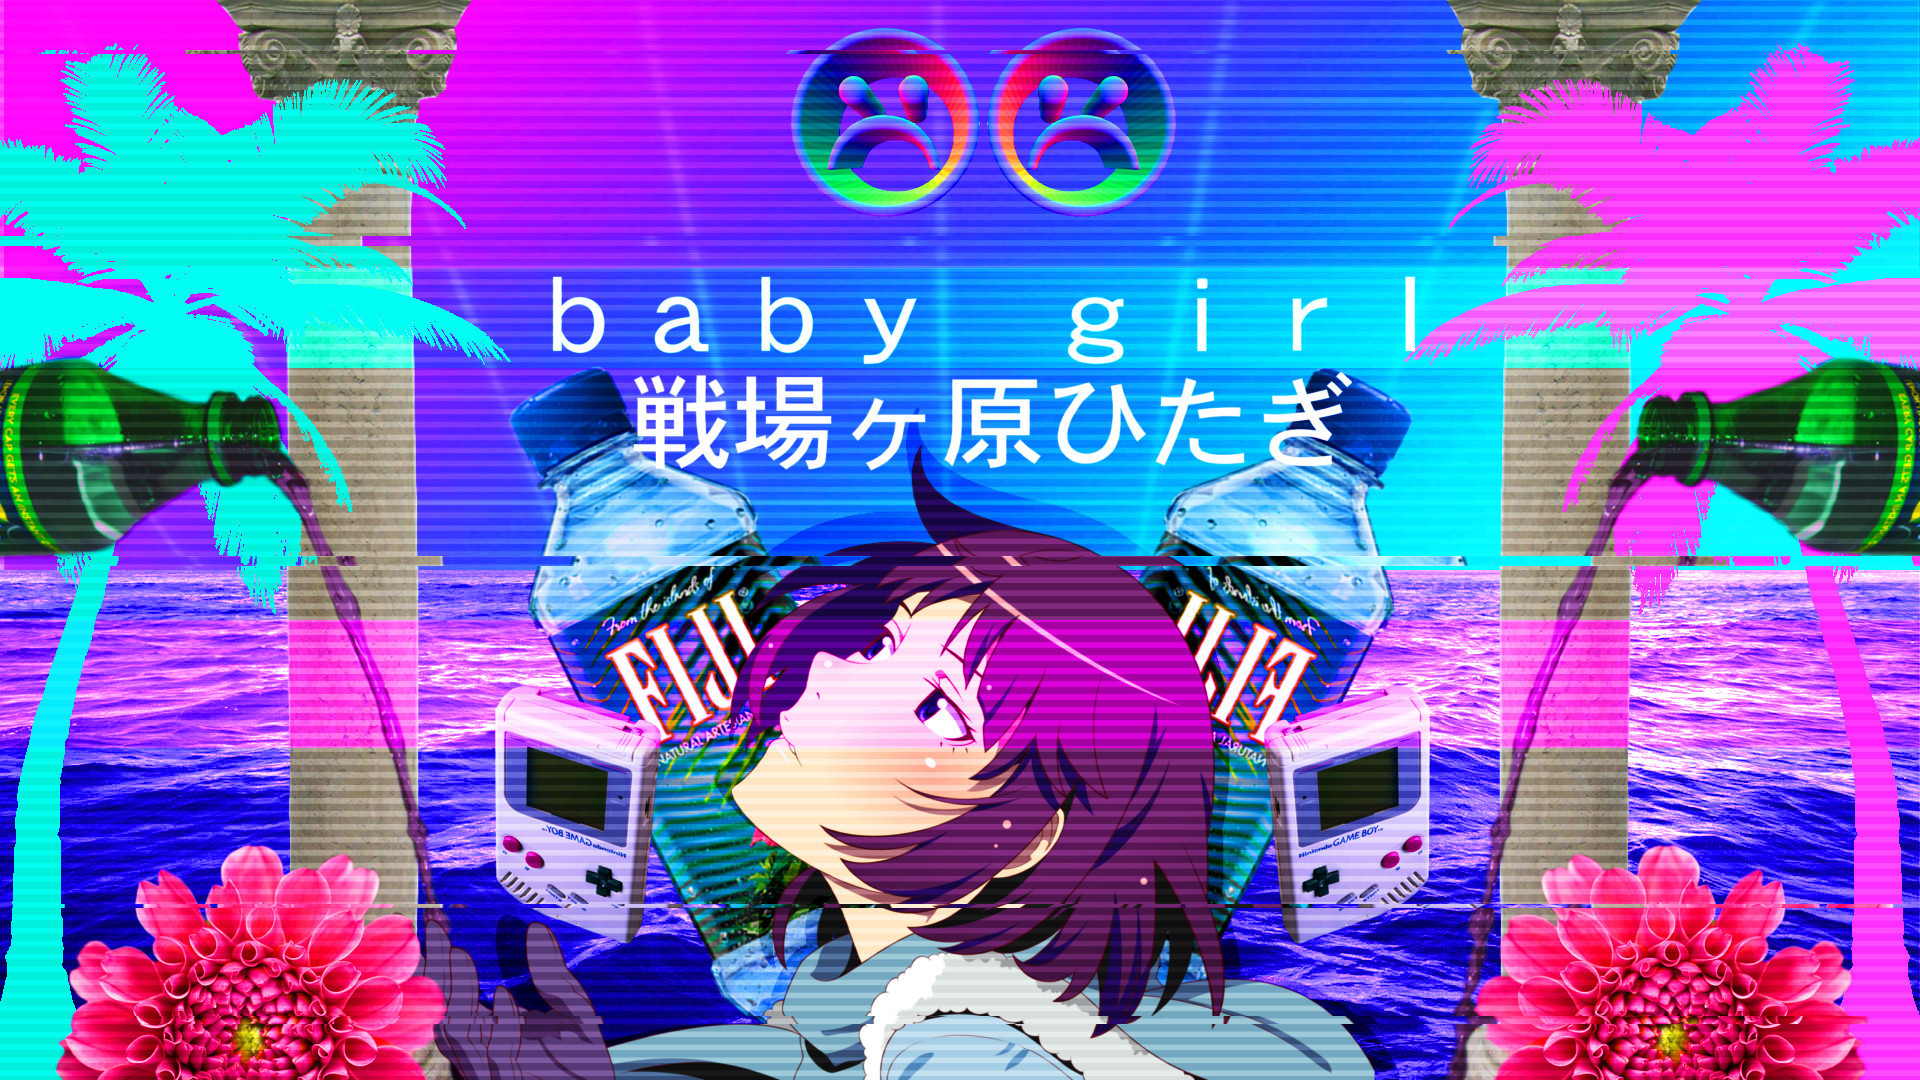 1920x1080 ... My Anime Vaporwave Wallpaper #02 by iamthebest052